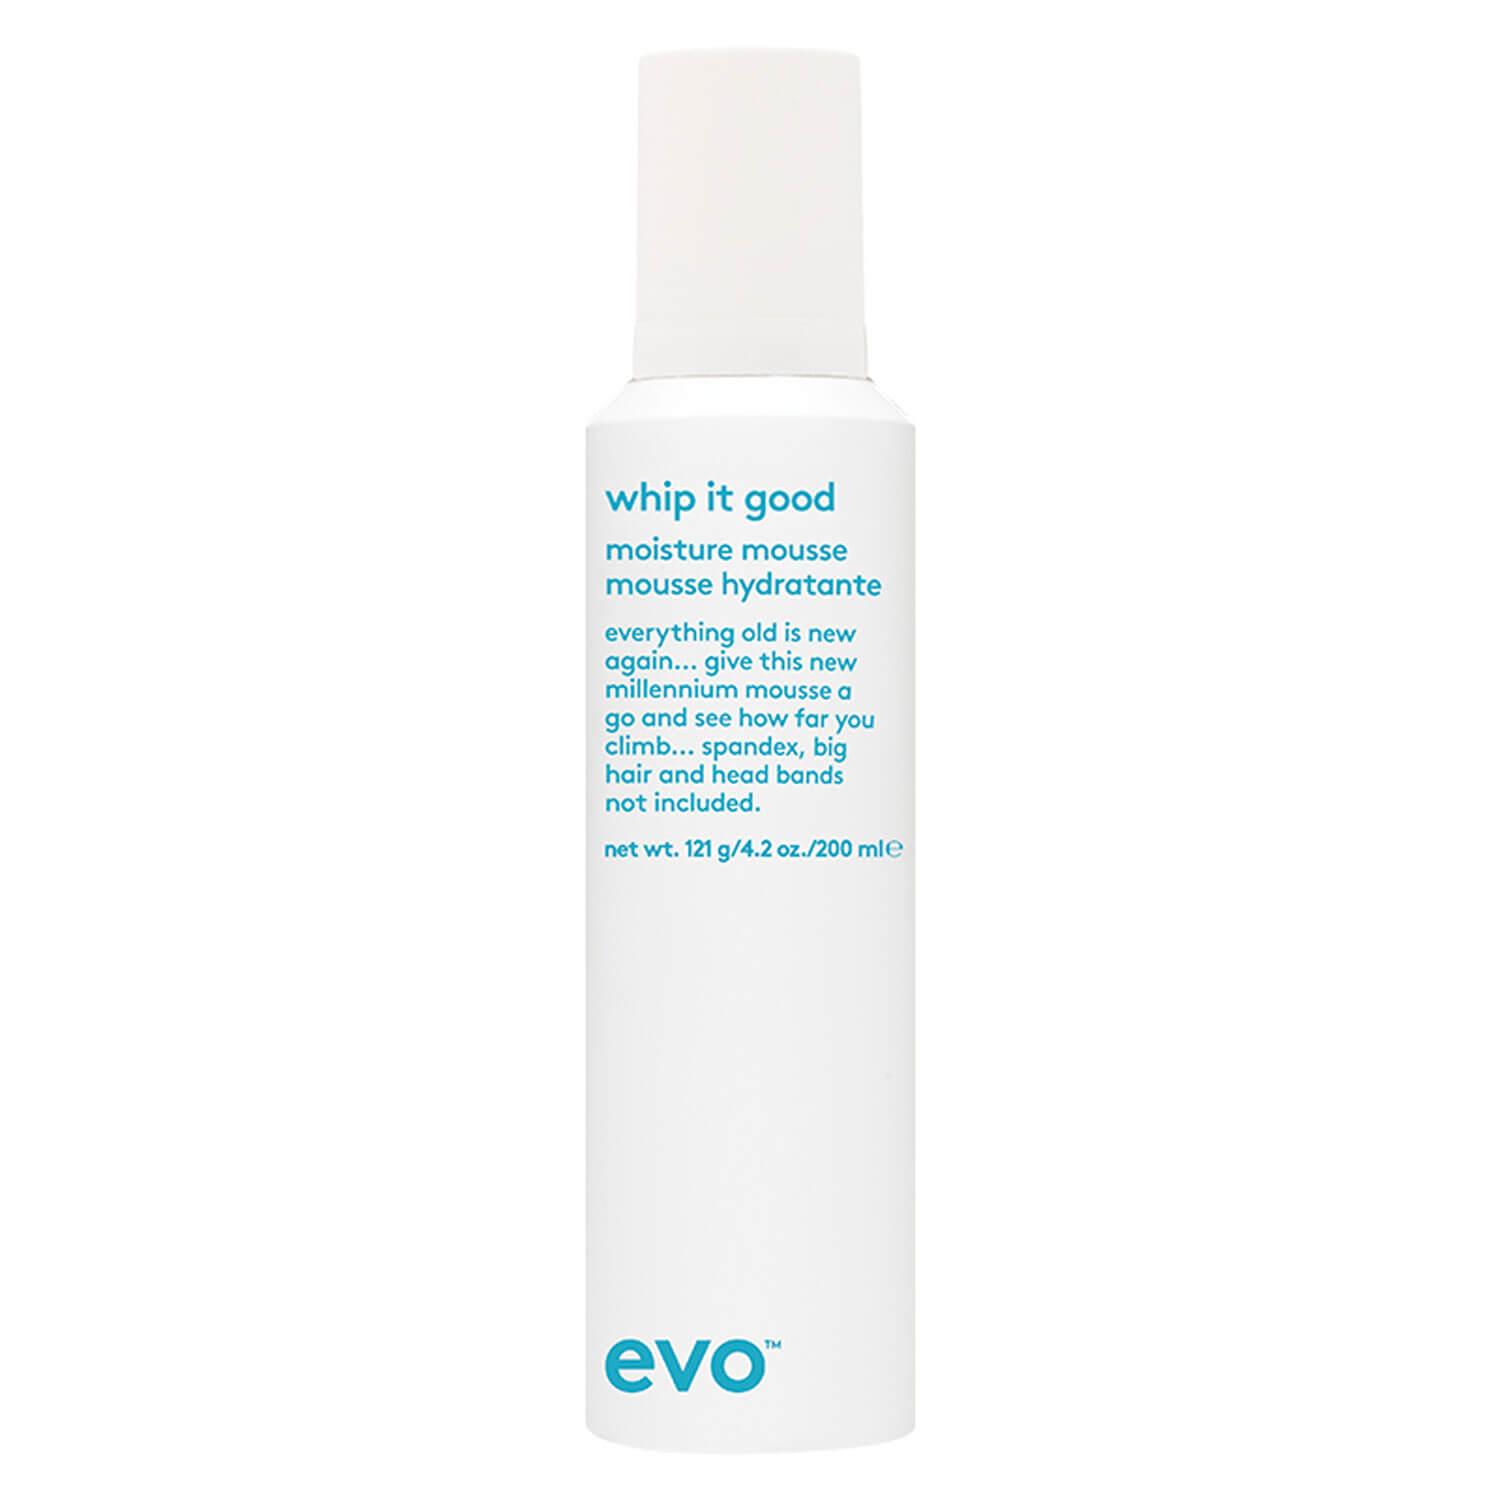 evo curl - whip it good moisture mousse